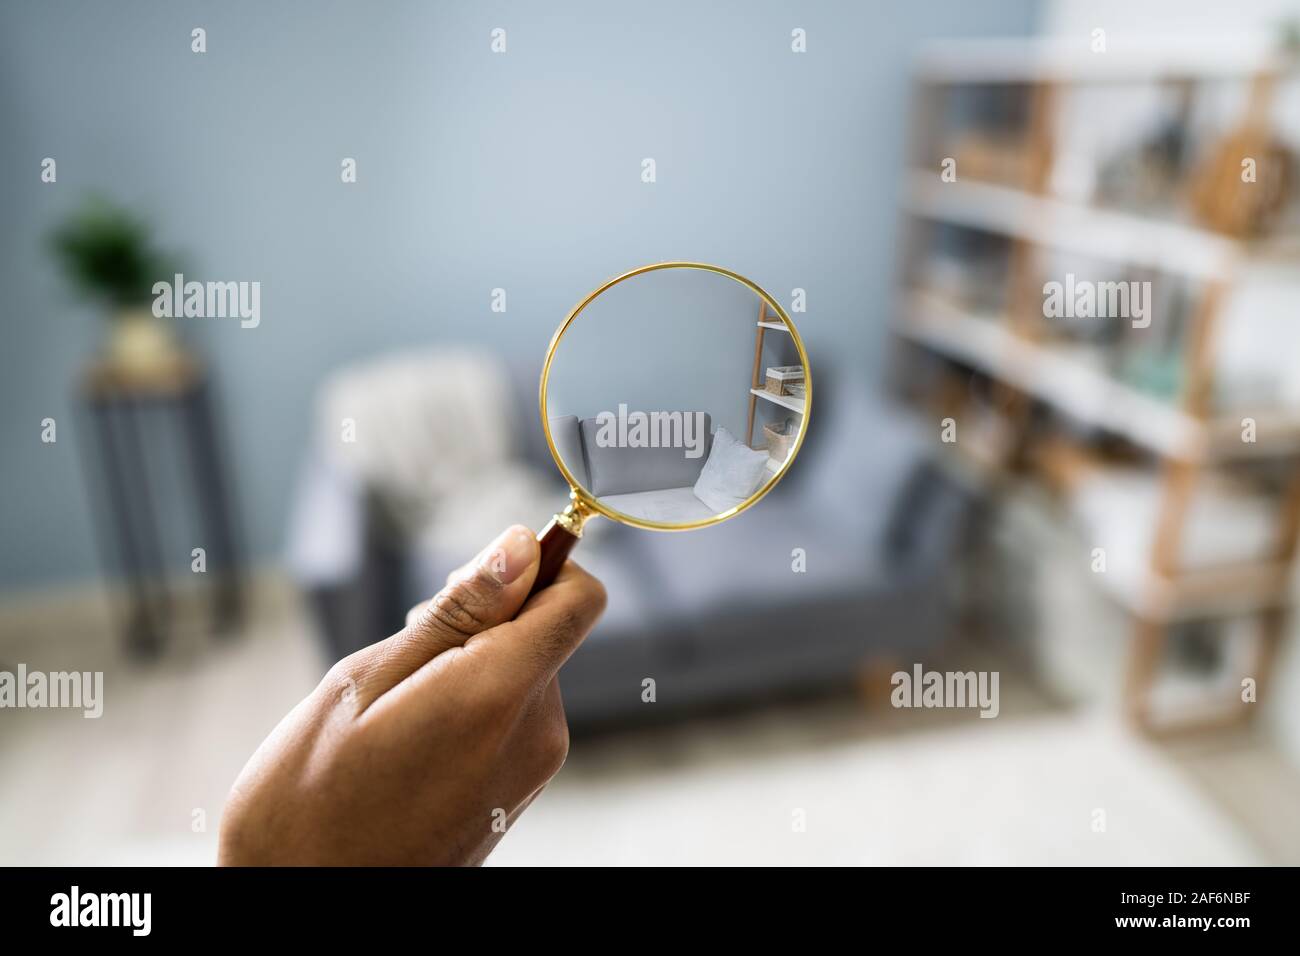 Close-up Of A Man's Hand Searching With Magnifying Glass At Home Stock Photo